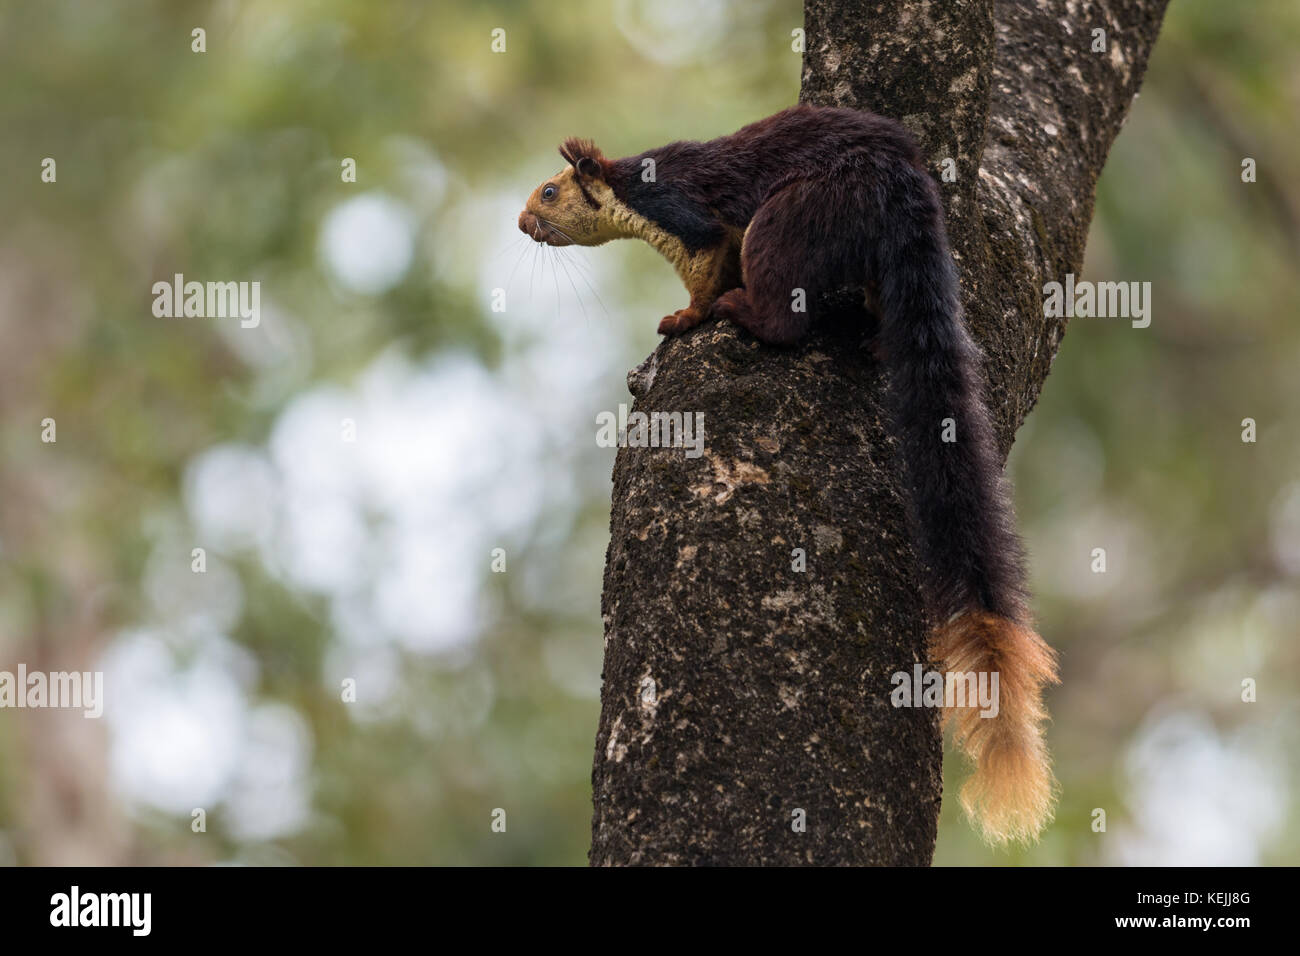 Indian Giant Squirrel perched on a tree Stock Photo